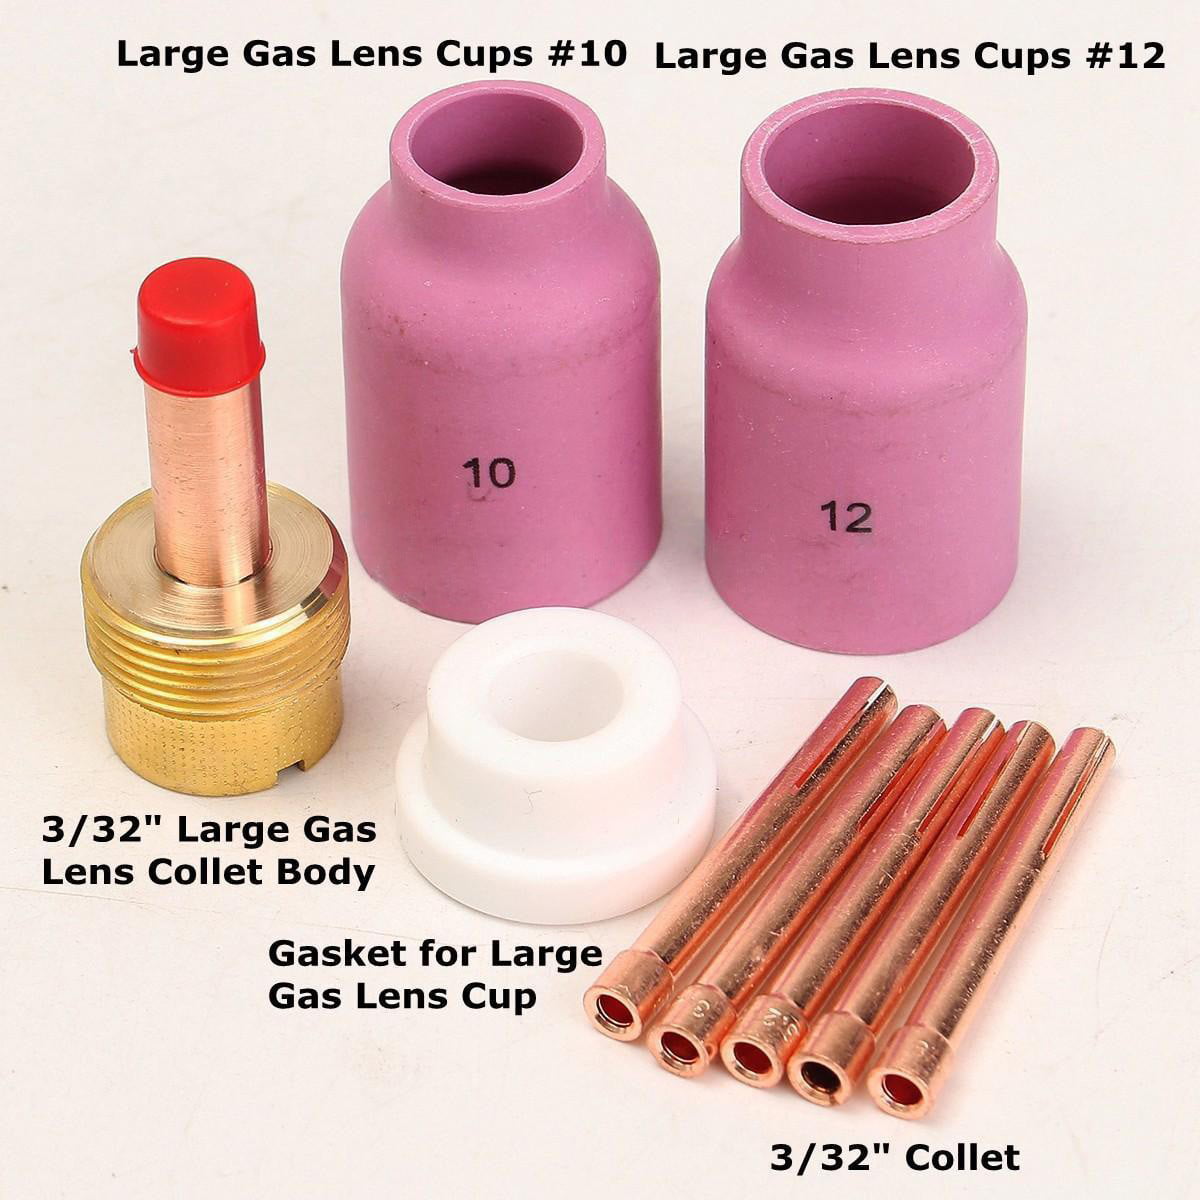 TIG Welding Torch #10 #12 Gas Lens Cups Collet Kit 3/32 For WP-17/18/26 TAK18 